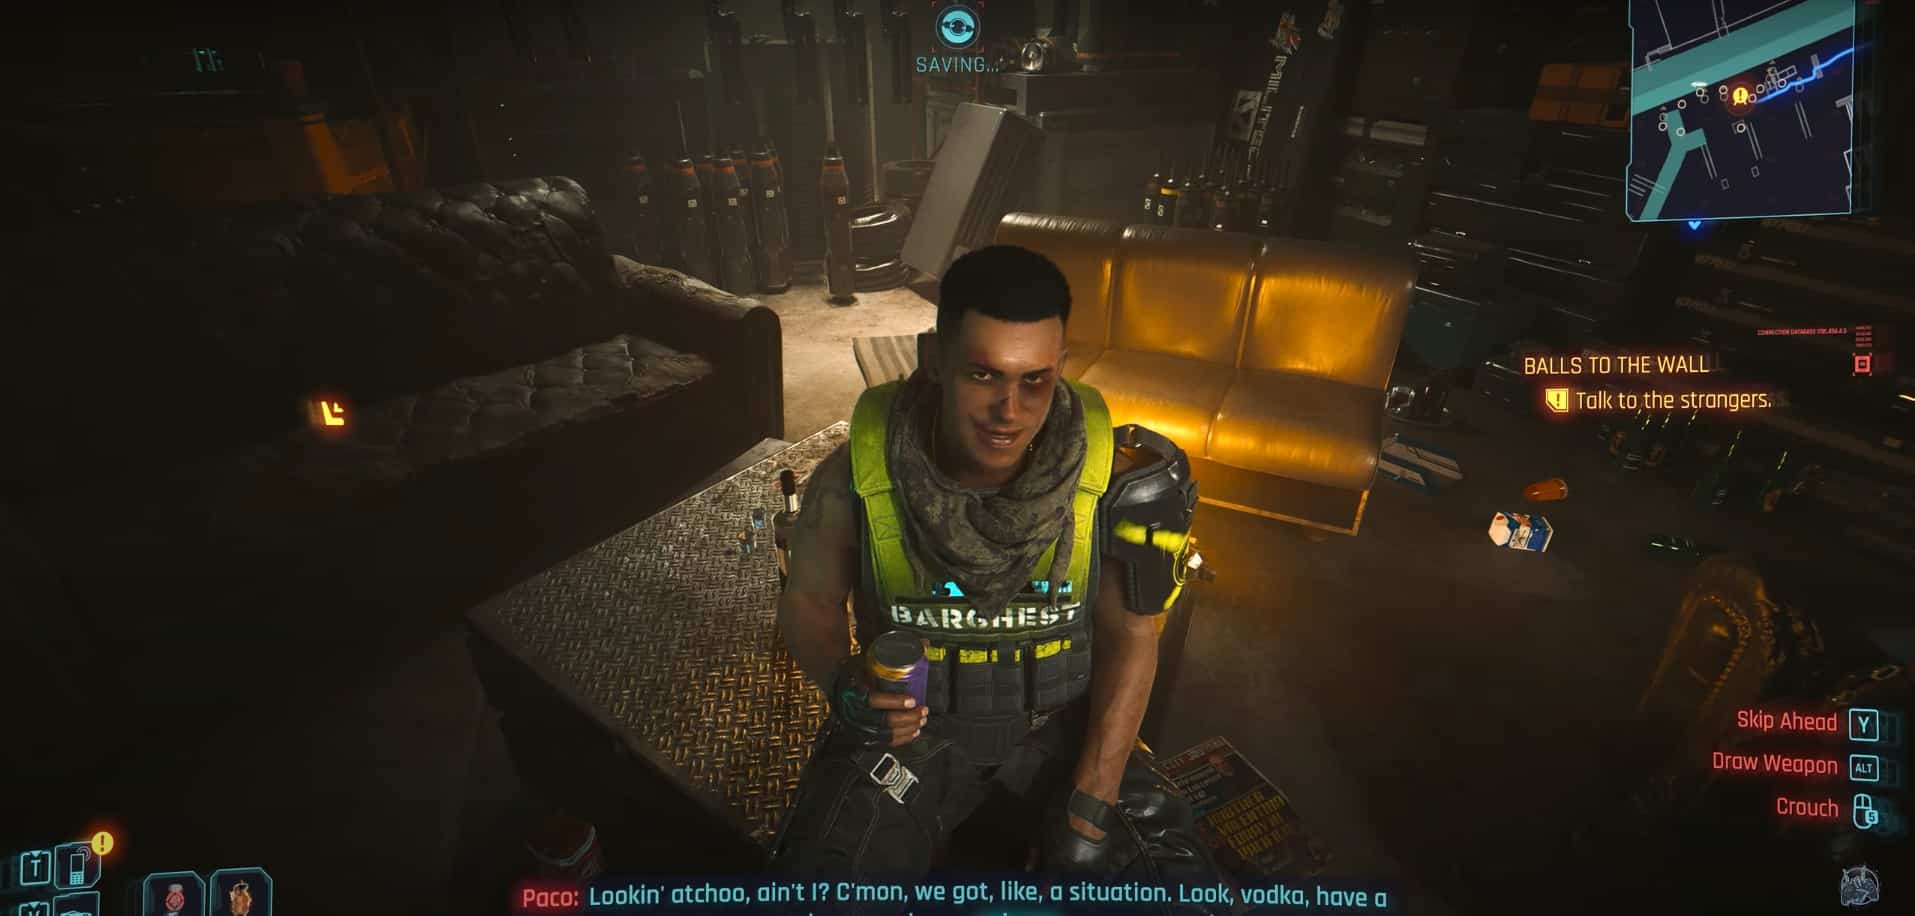 Balls to The Wall Side Job in Cyberpunk 2077